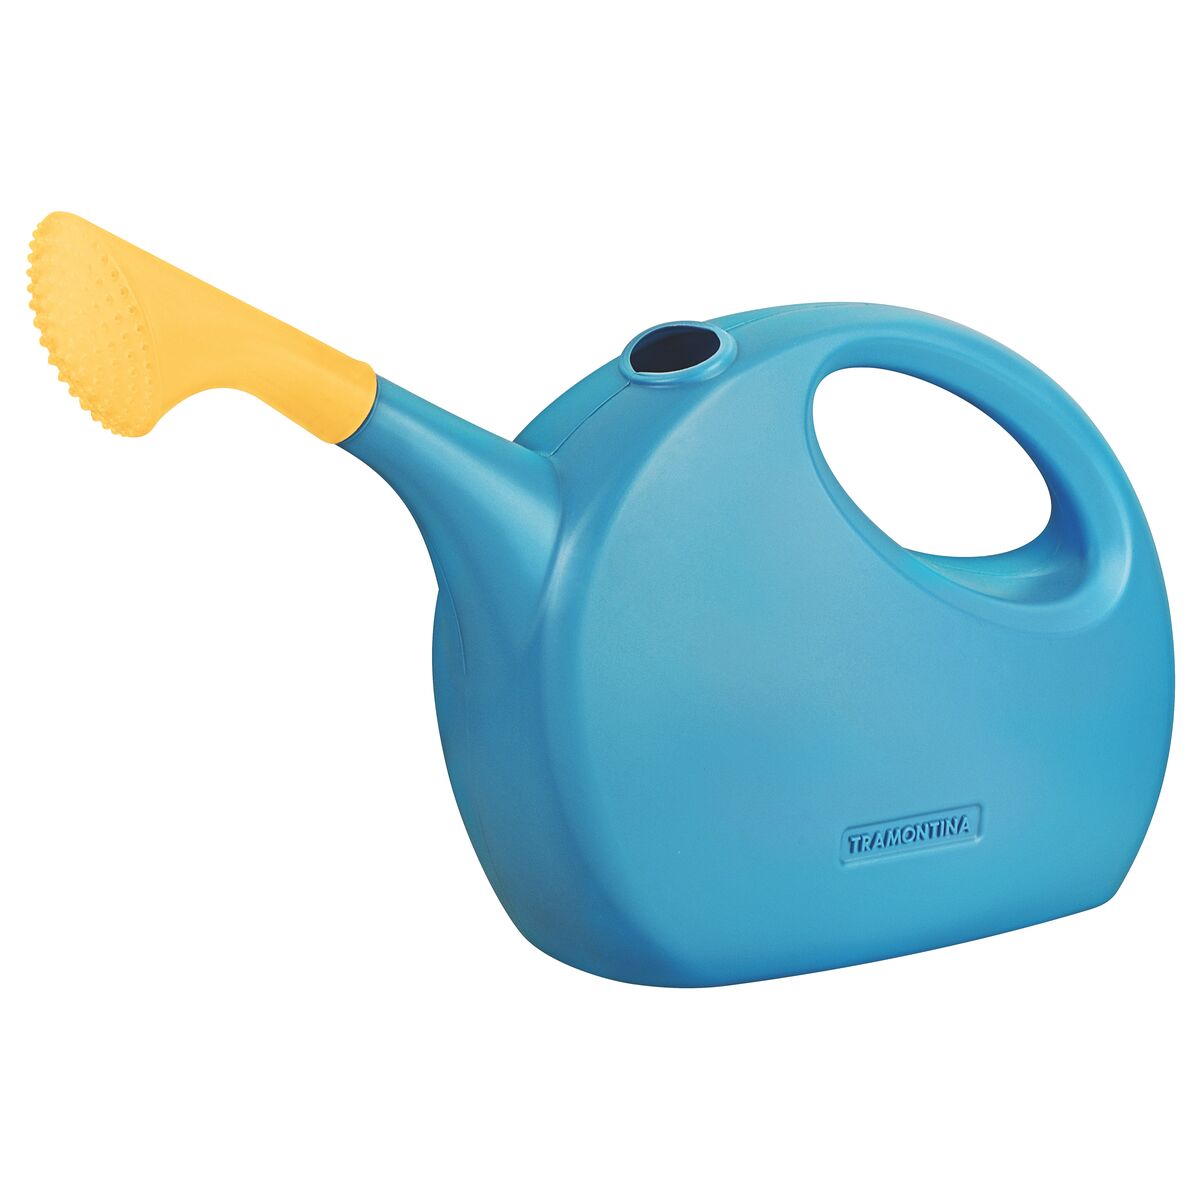 Tramontina's 7 L Blue Plastic Watering Can